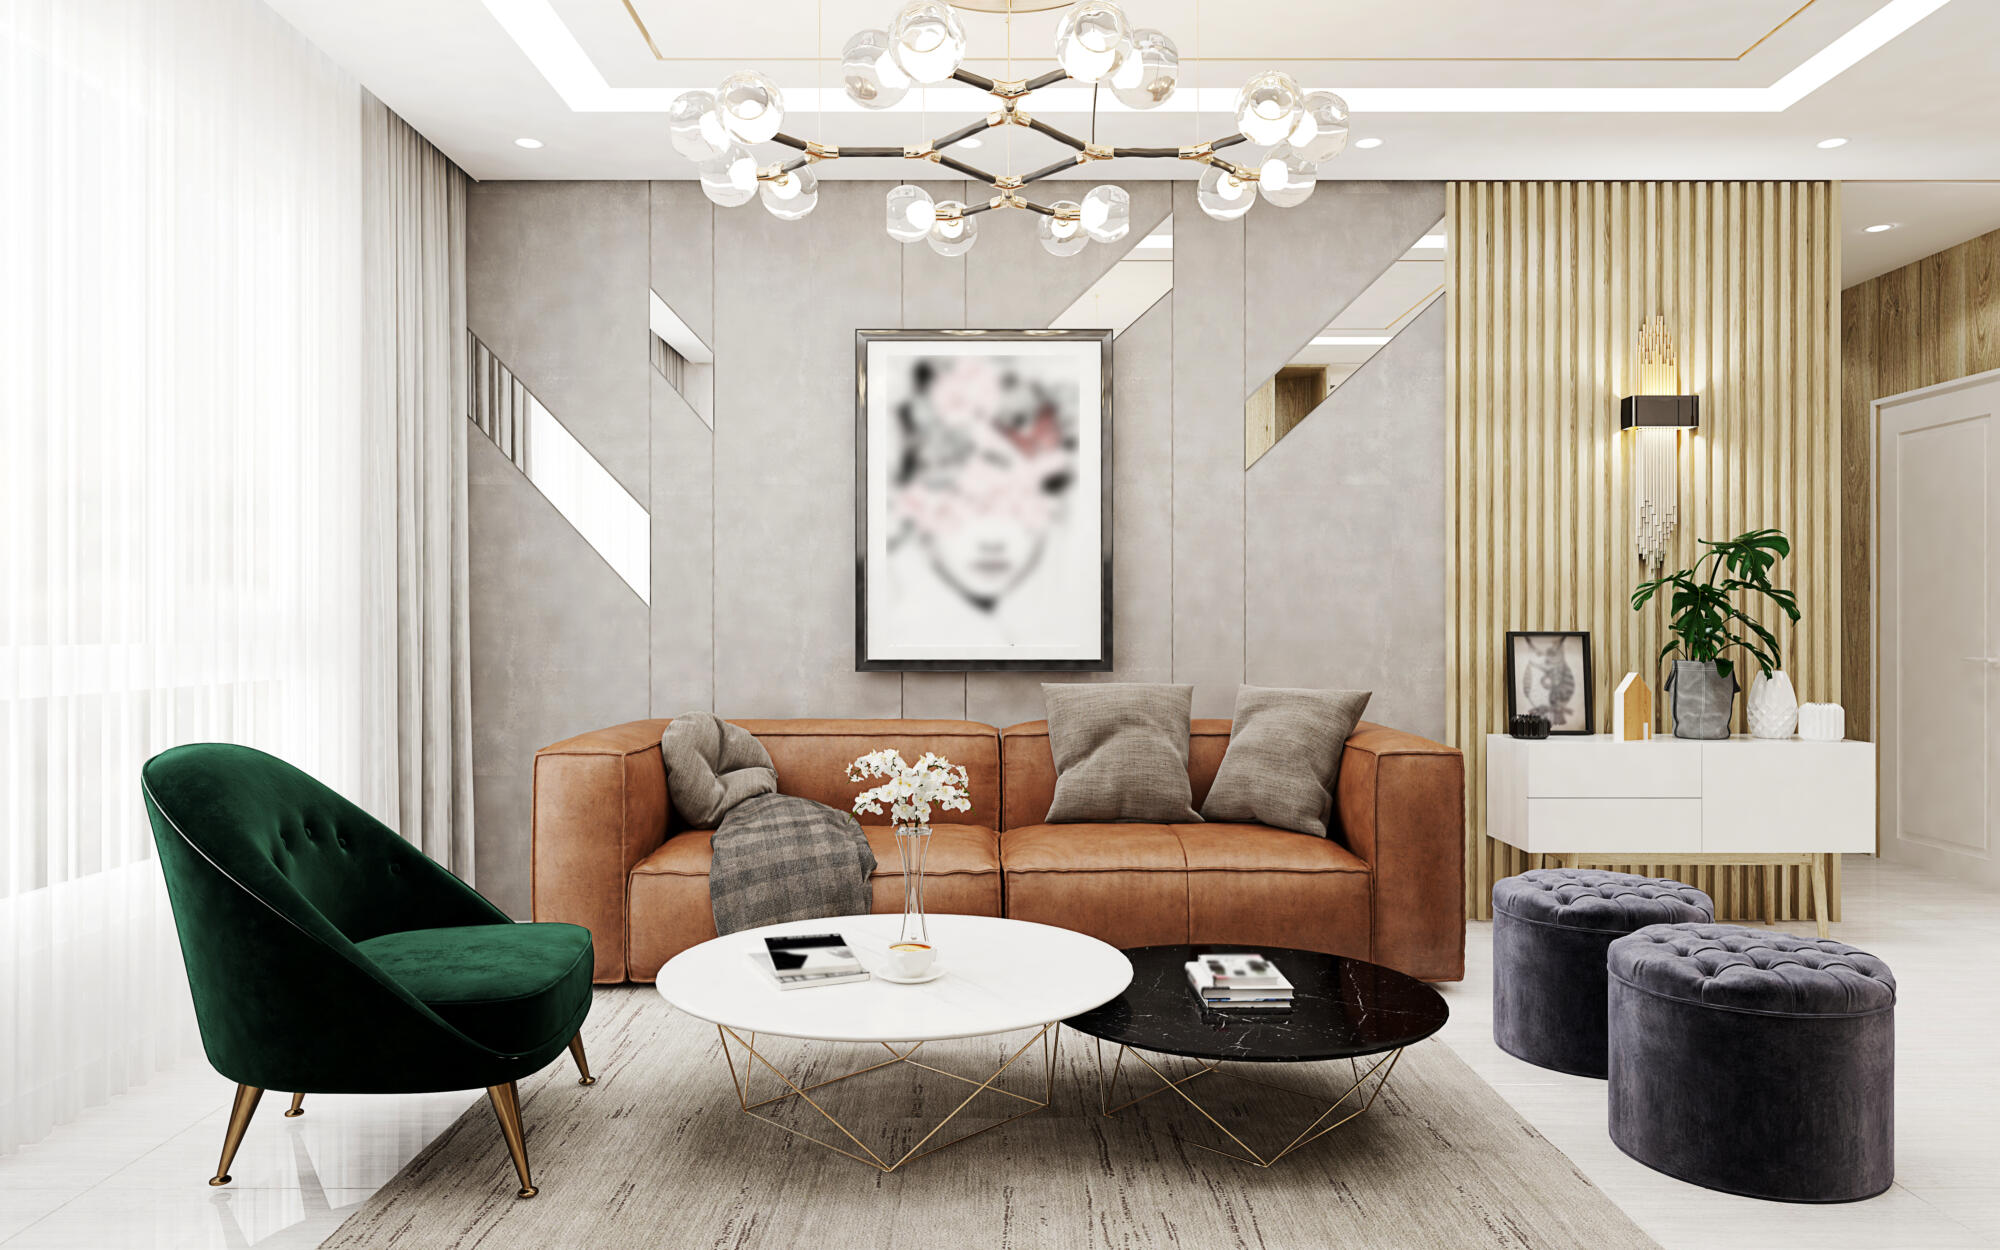 Home Design Tips: How To Create a Modern Living Room.